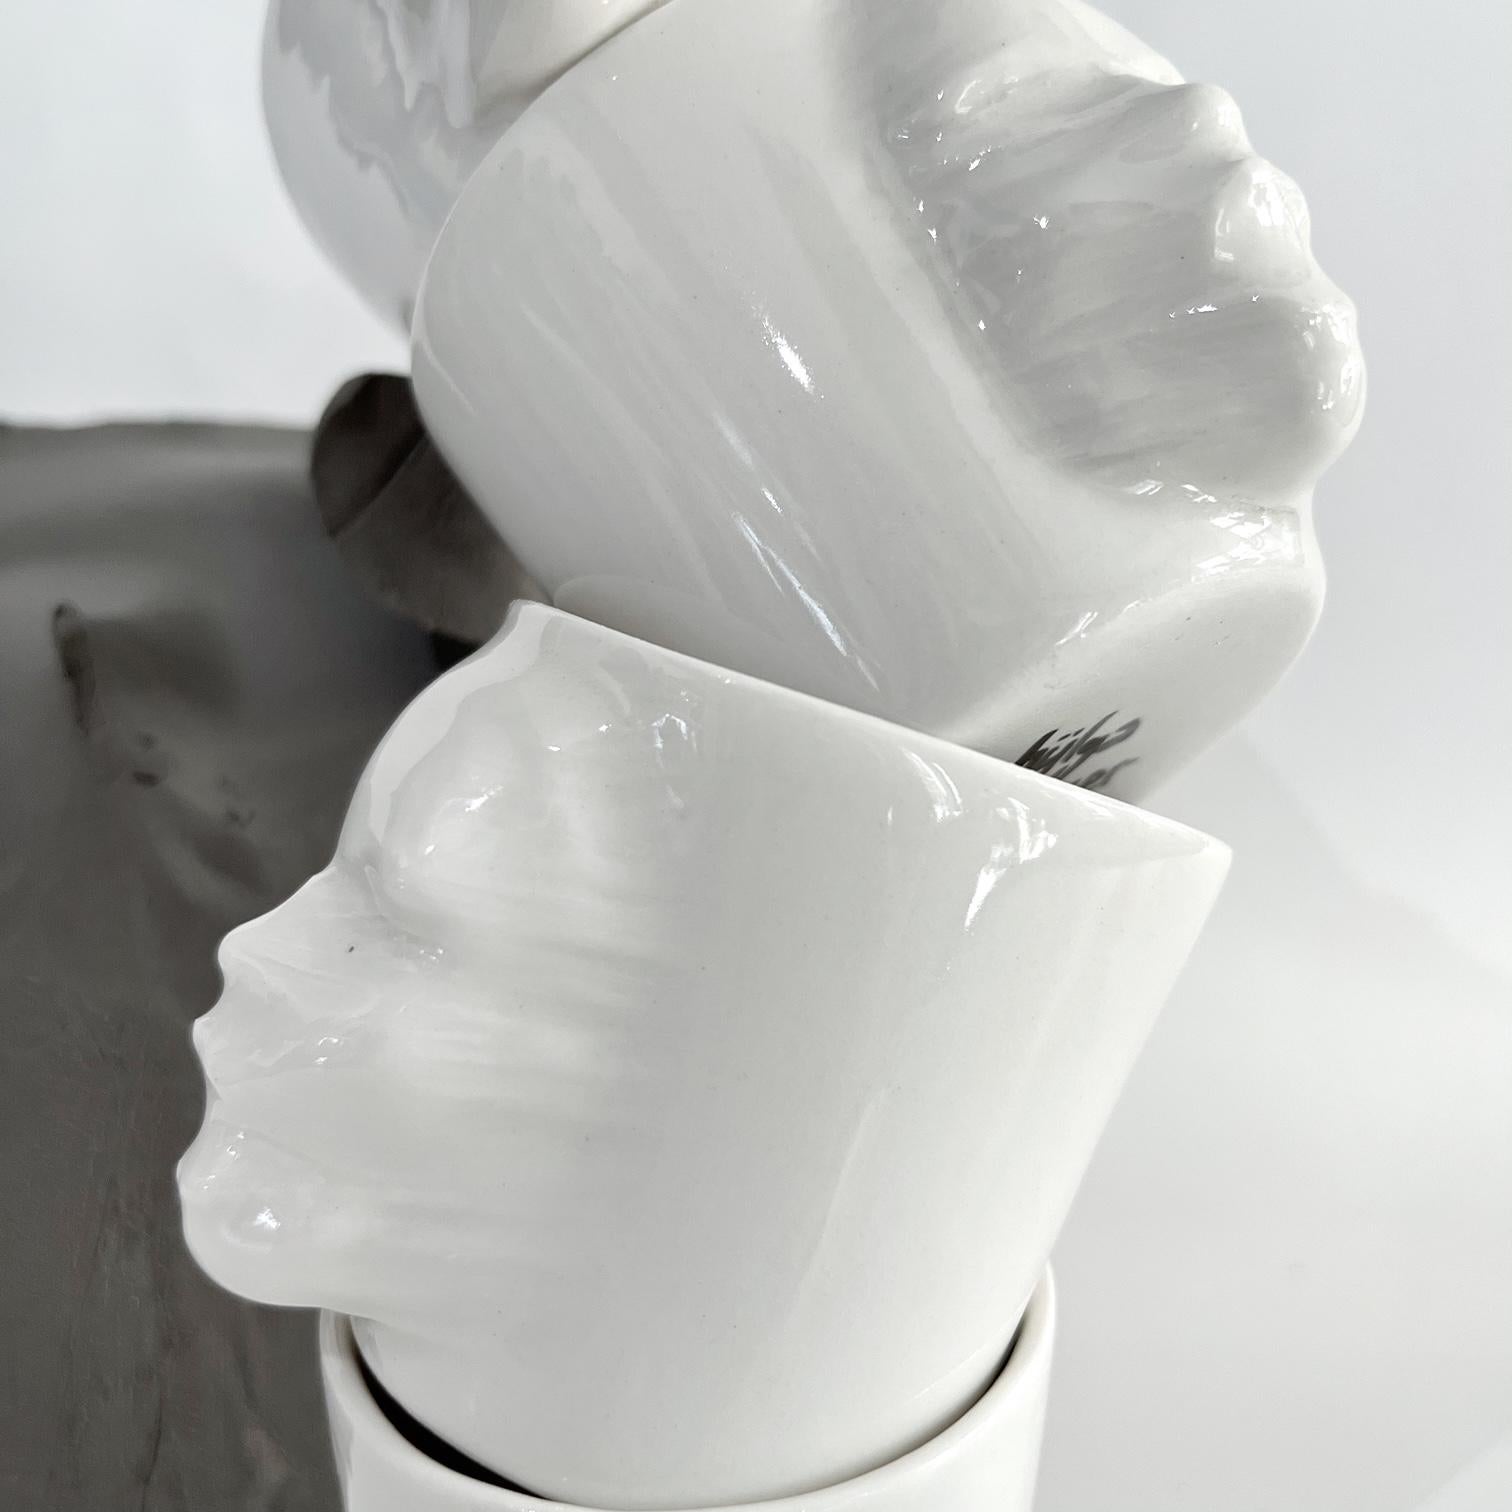 Sculptural Porcelain Cups Set of 2 by Hulya Sozer, Face Silhouette, White In New Condition For Sale In Mugla, Bodrum